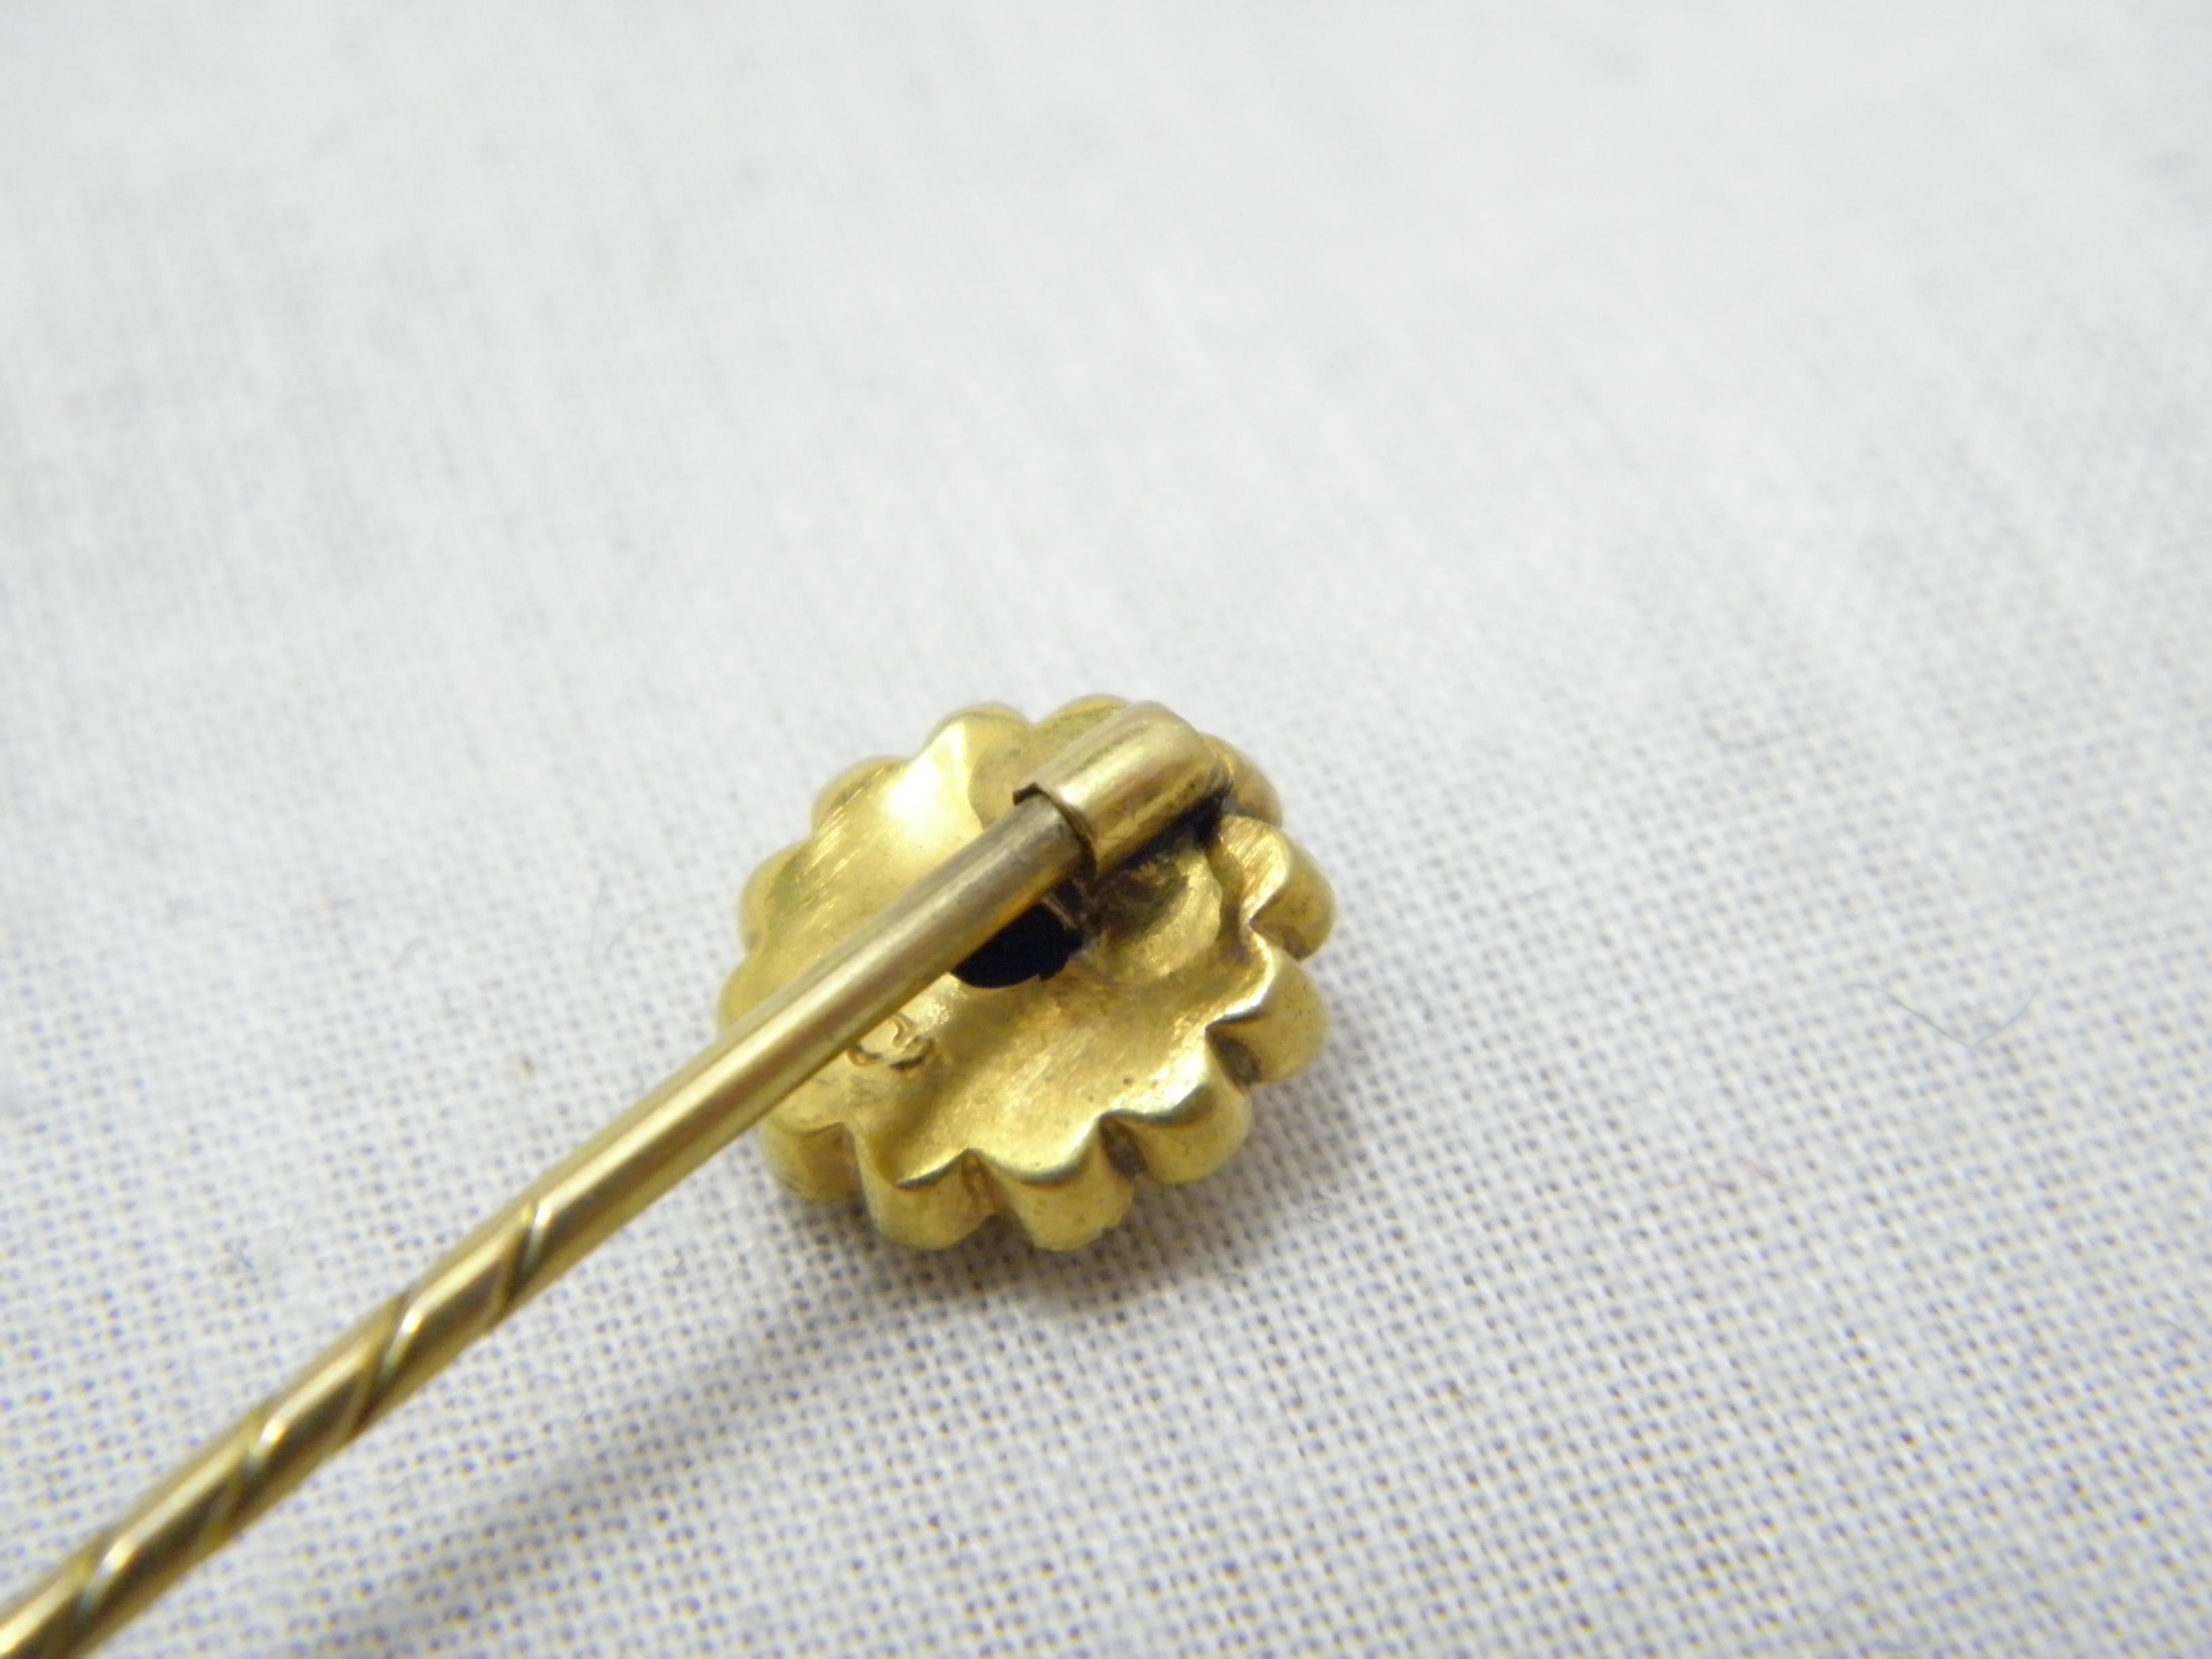 Antique 15ct Gold Diamond Stock Pin Brooch c1880 Heavy 625 Purity Tie Lapel Hat For Sale 1